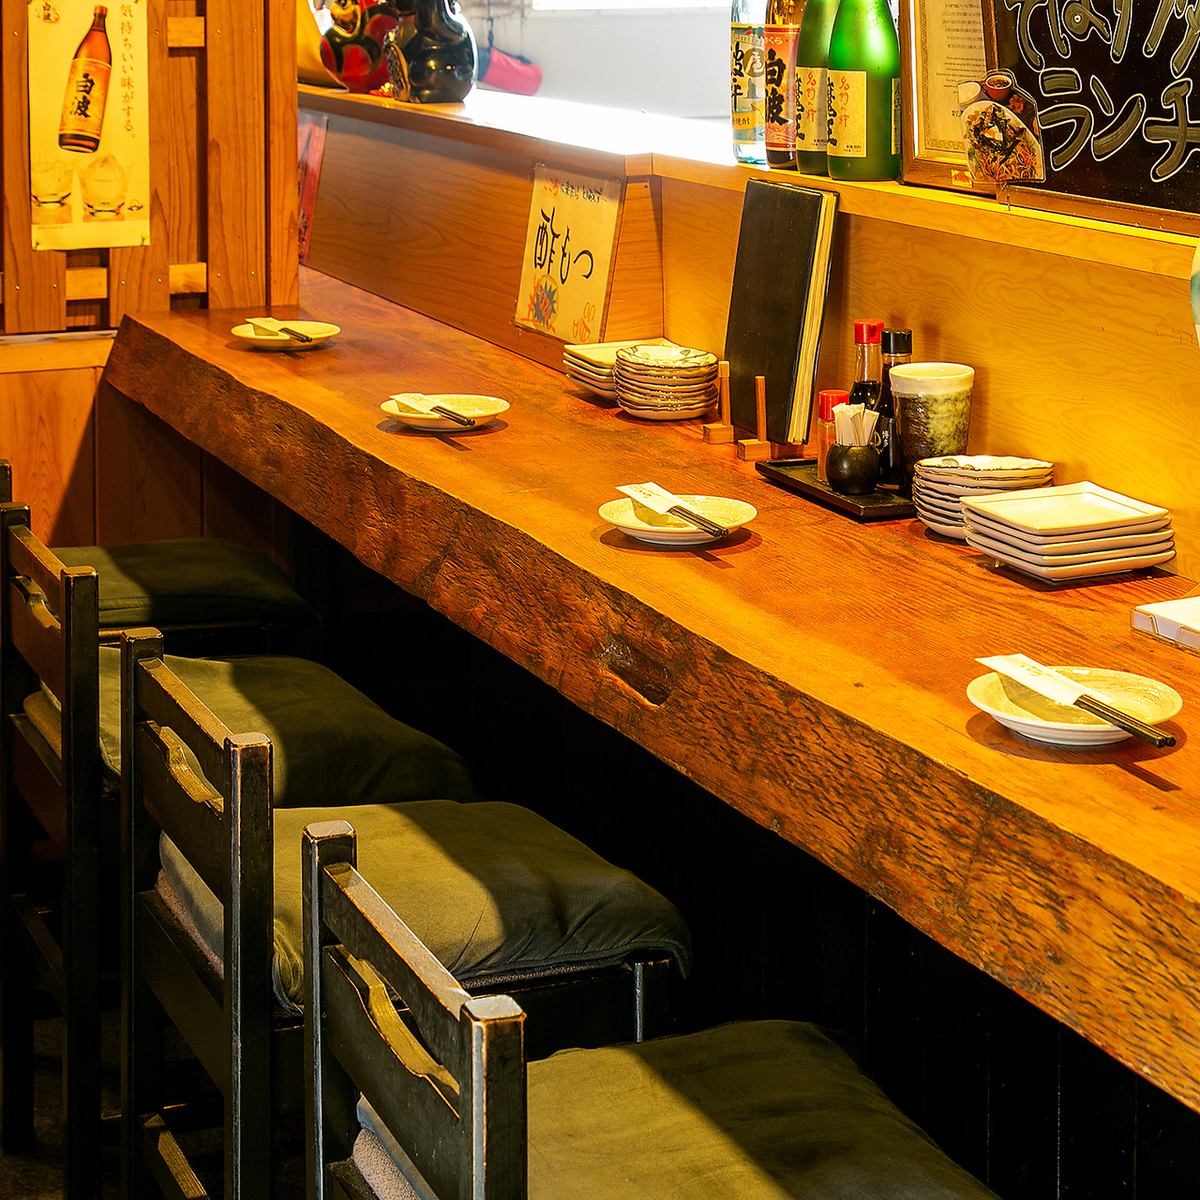 A space where you can relax while enjoying delicious food and sake!